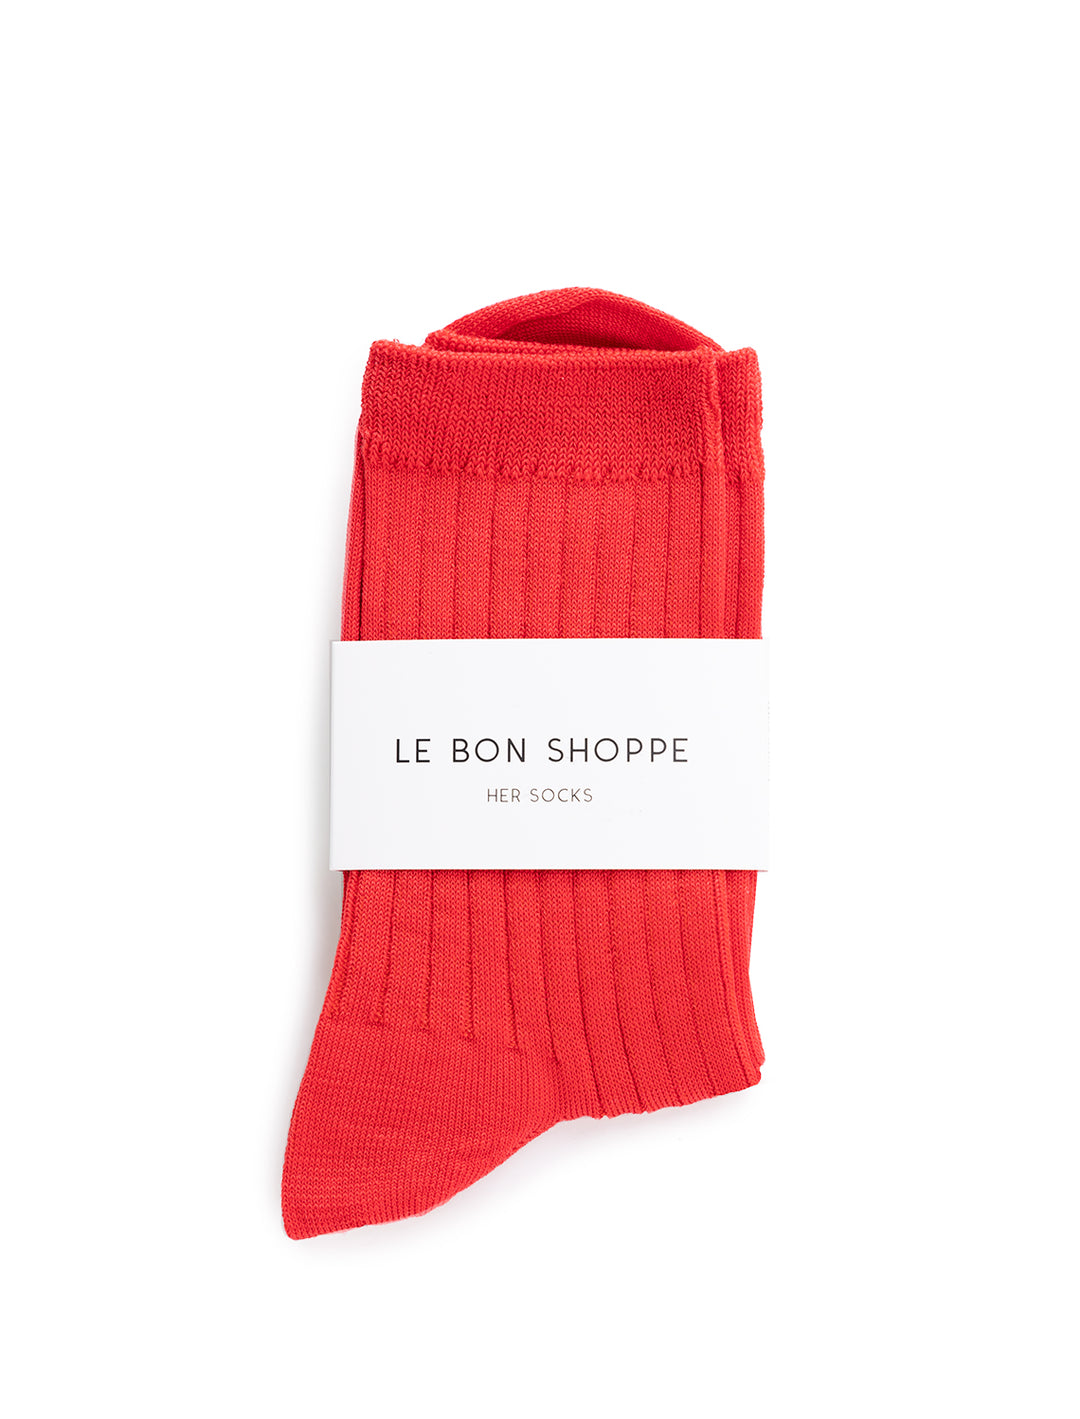 Front view of Le Bon Shoppe's her socks in classic red.